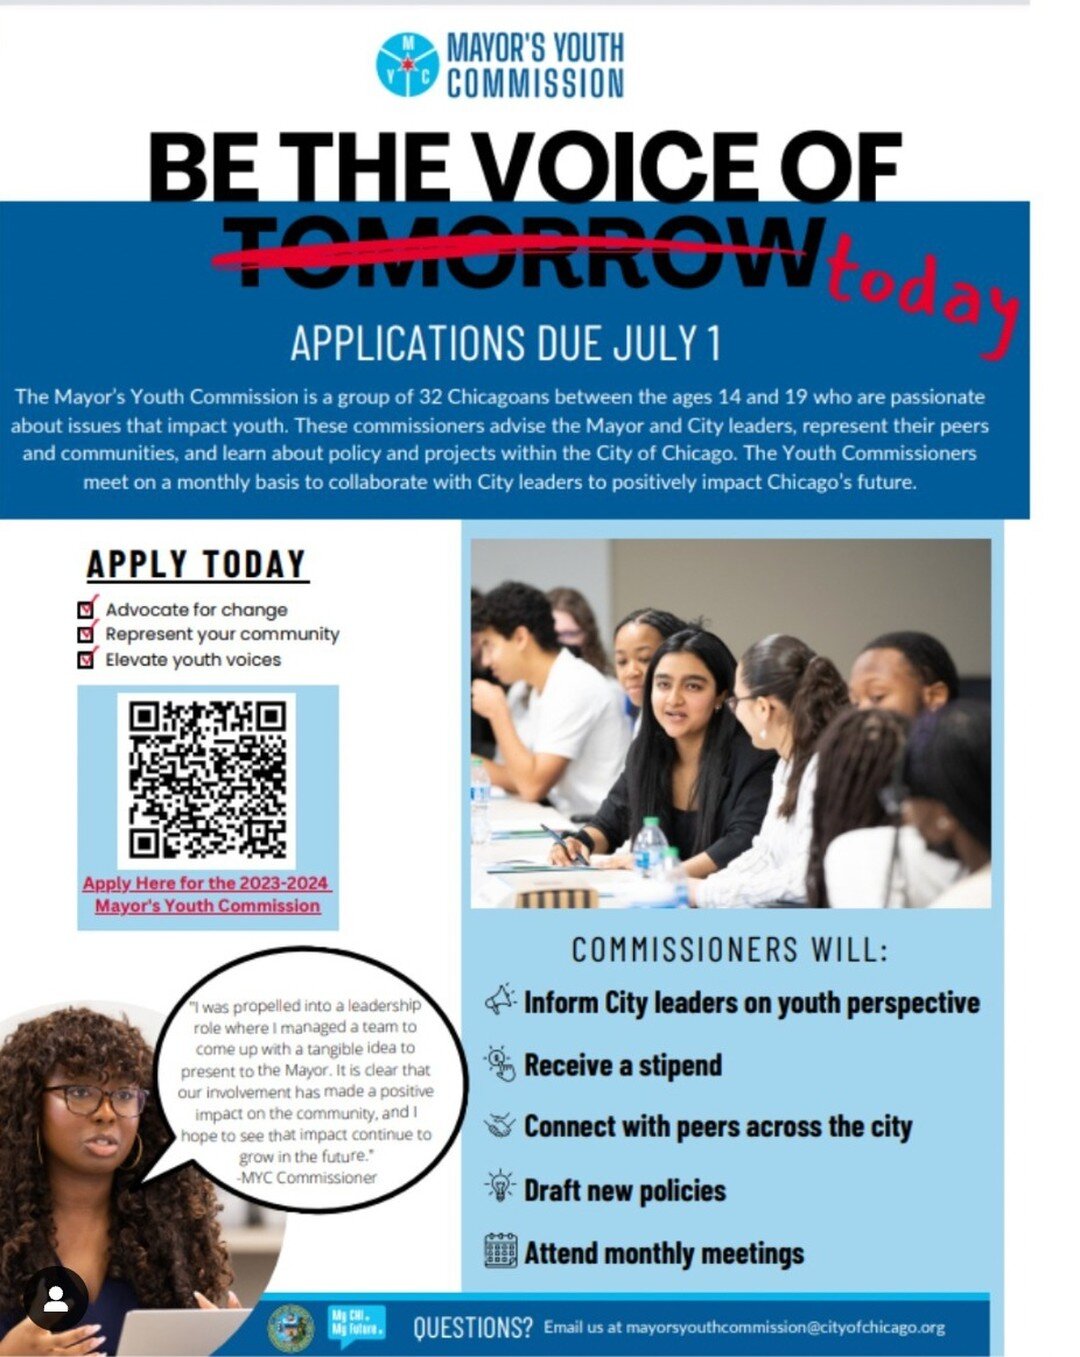 Be the voice of today!

The Mayor's Youth Commission is hiring Chicago teens to advise the Mayor and other City leaders on public health, education, public safety, and neighborhood development.

👋 Open to Chicago youth ages 14-19
⌛ 5-10 hours per mo